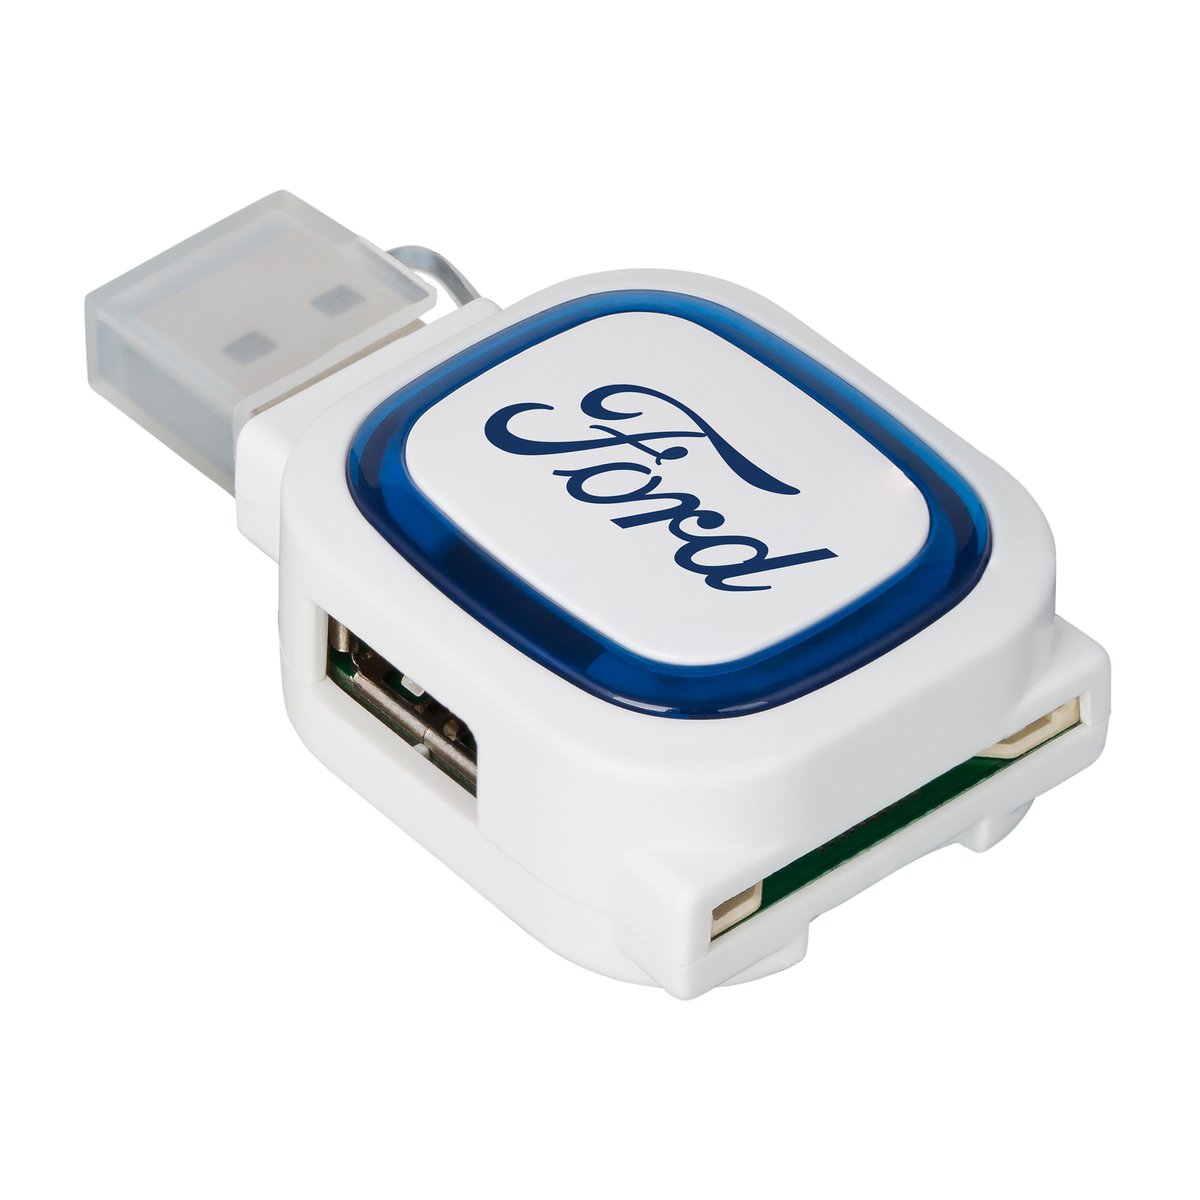 2-port USB hub and card reader COLLECTION 500 blue